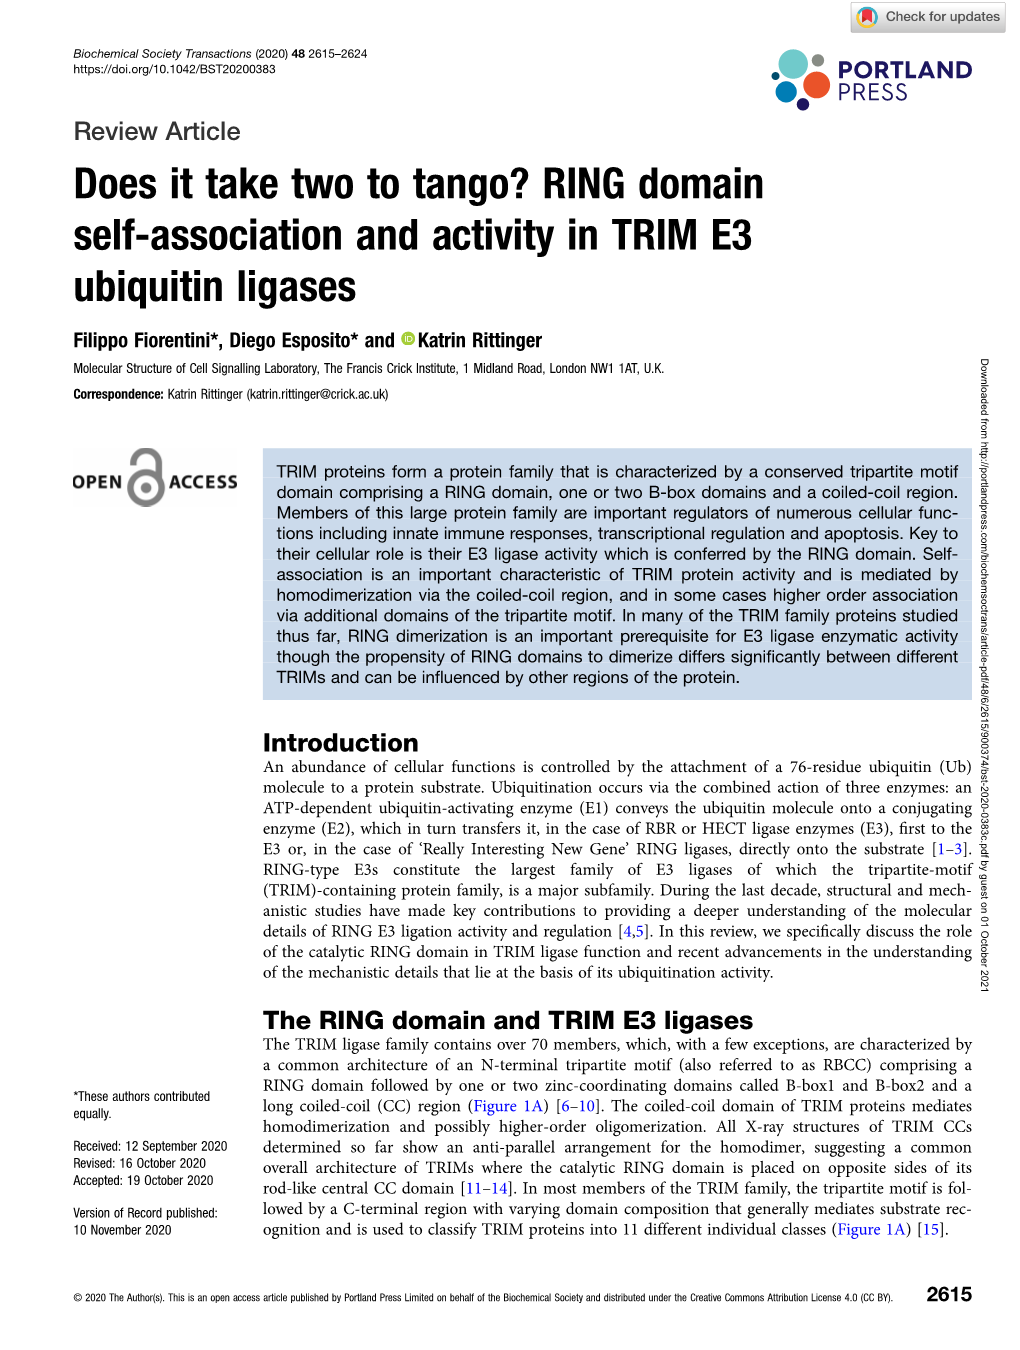 Does It Take Two to Tango? RING Domain Self-Association and Activity in TRIM E3 Ubiquitin Ligases